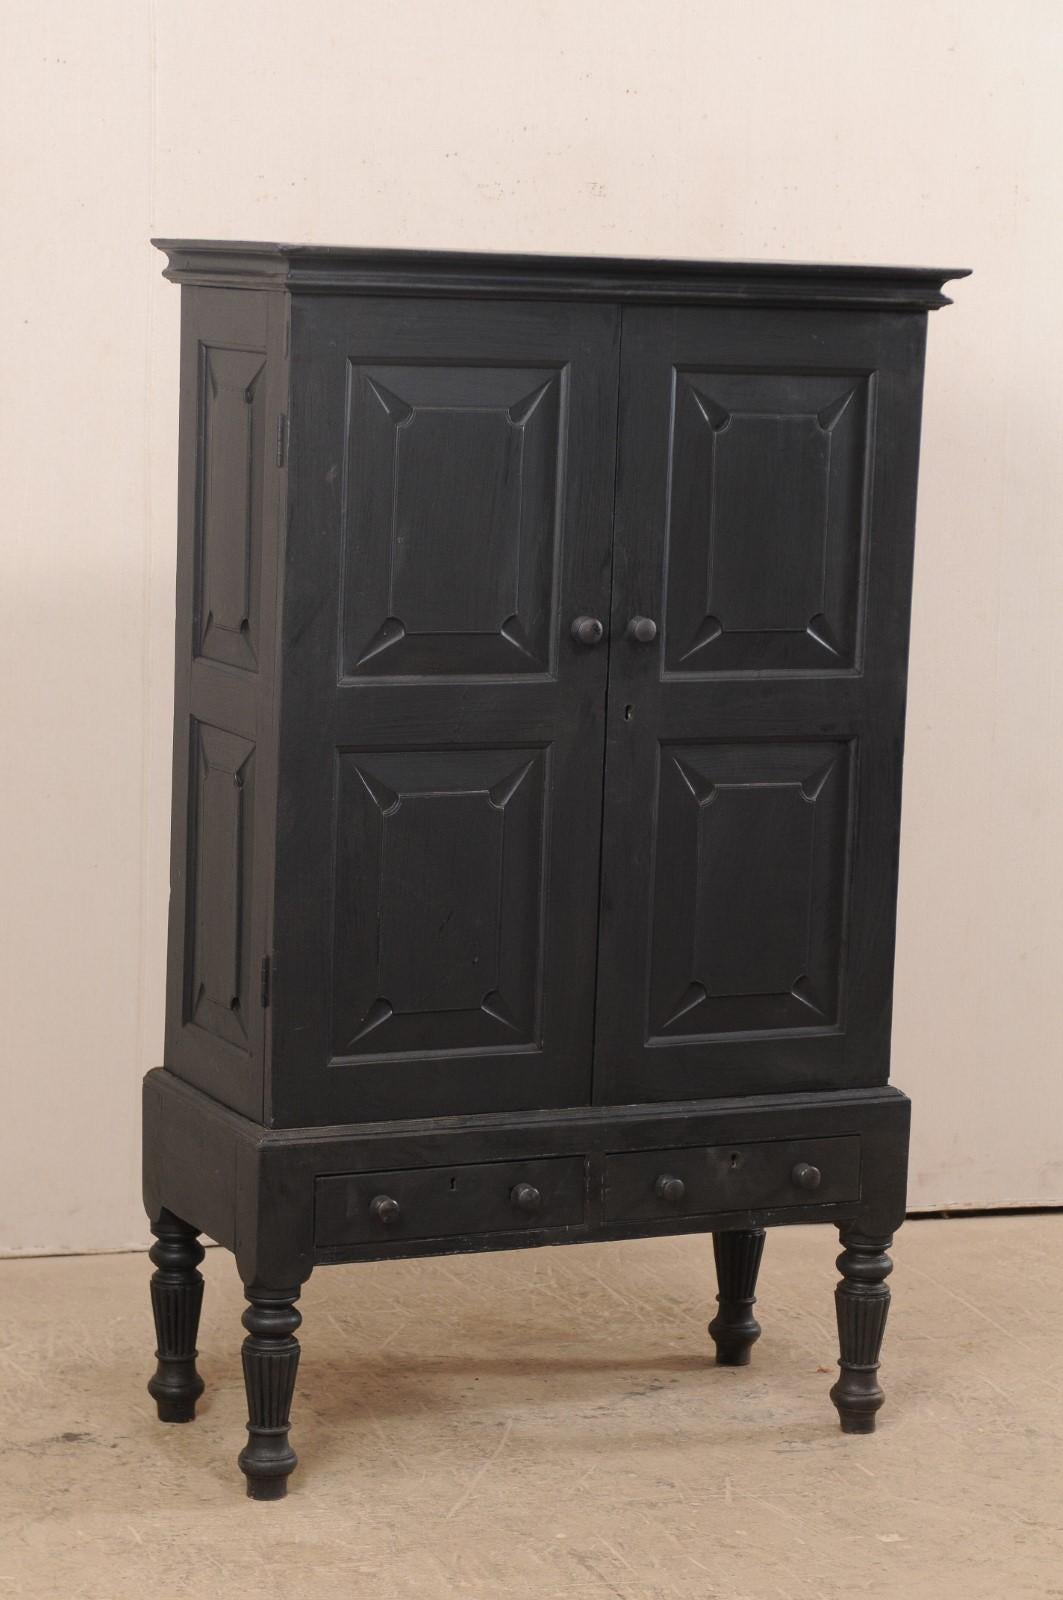 Carved Vintage British Colonial Raised Black Colored Cabinet, Mid-20th Century